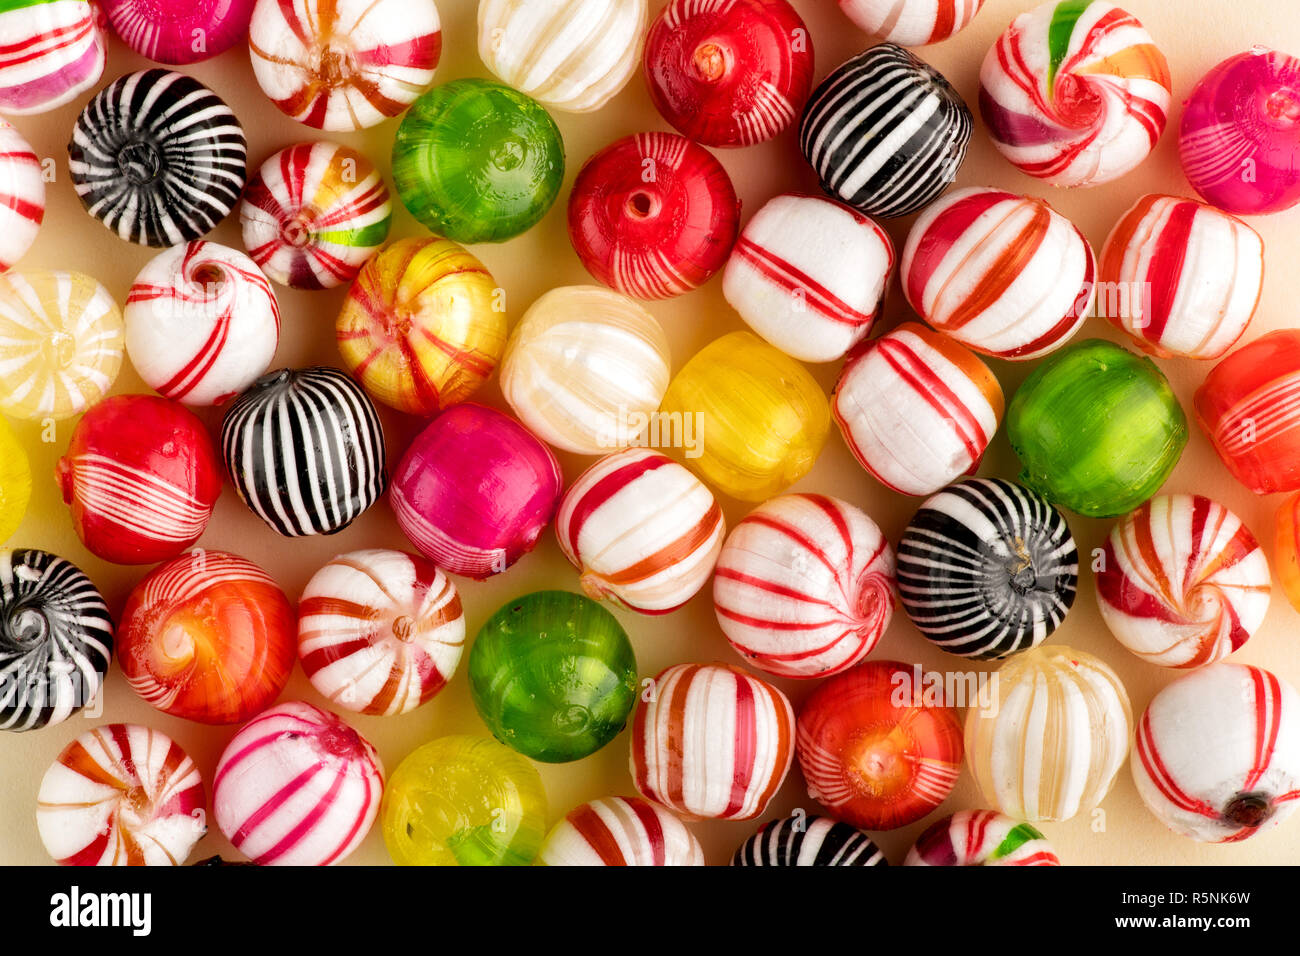 Colorful round candies of red, white, green, yellow and black colors with stripes, sitting on table surface in one layer, top view in full frame Stock Photo